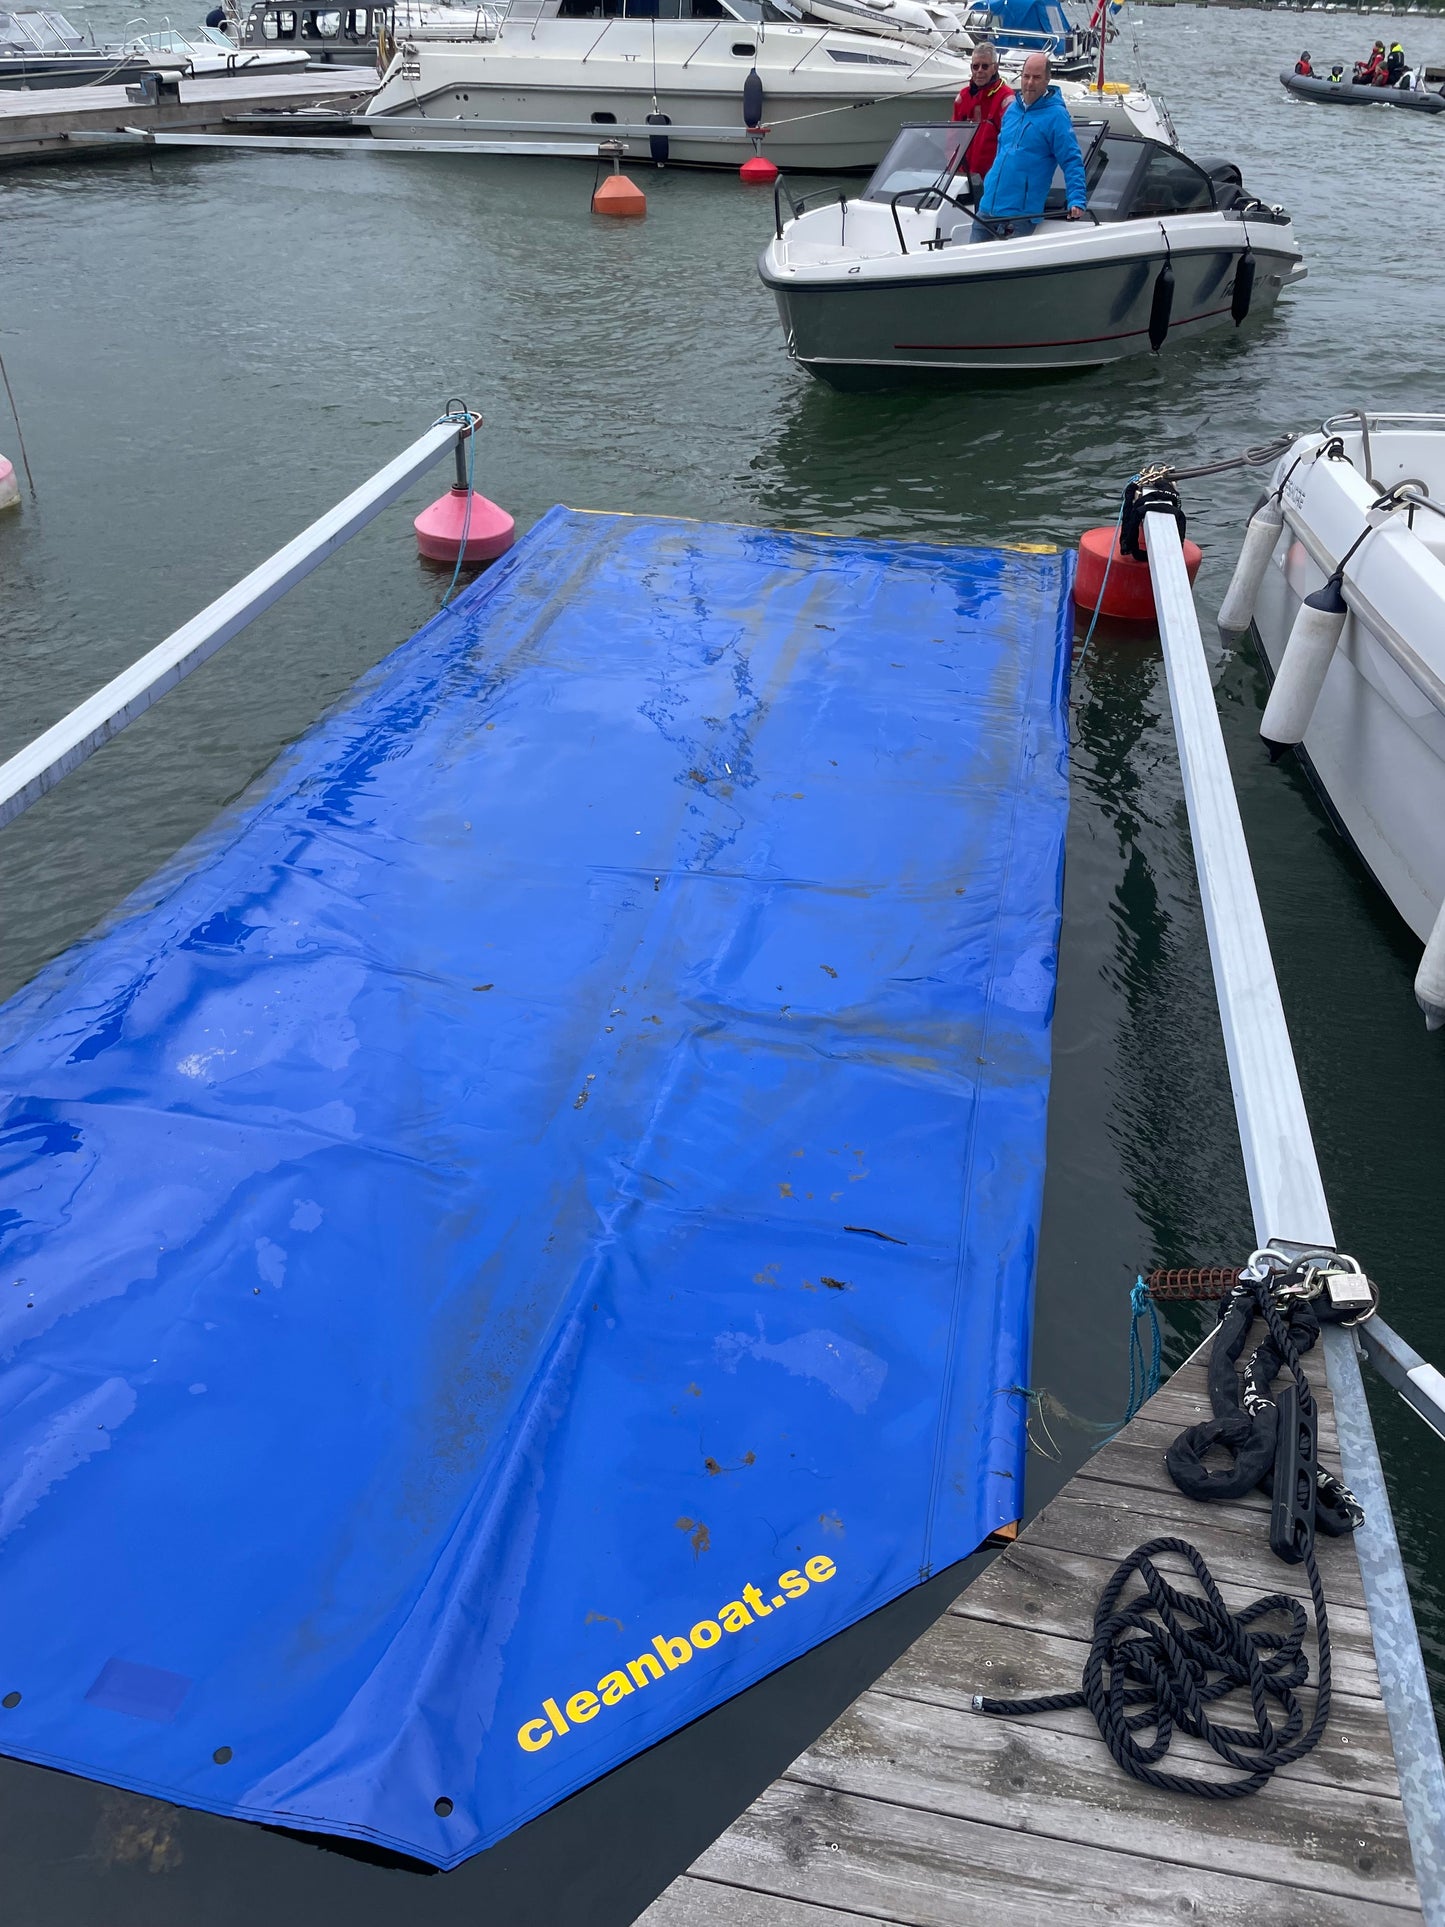 The Mooring Protector